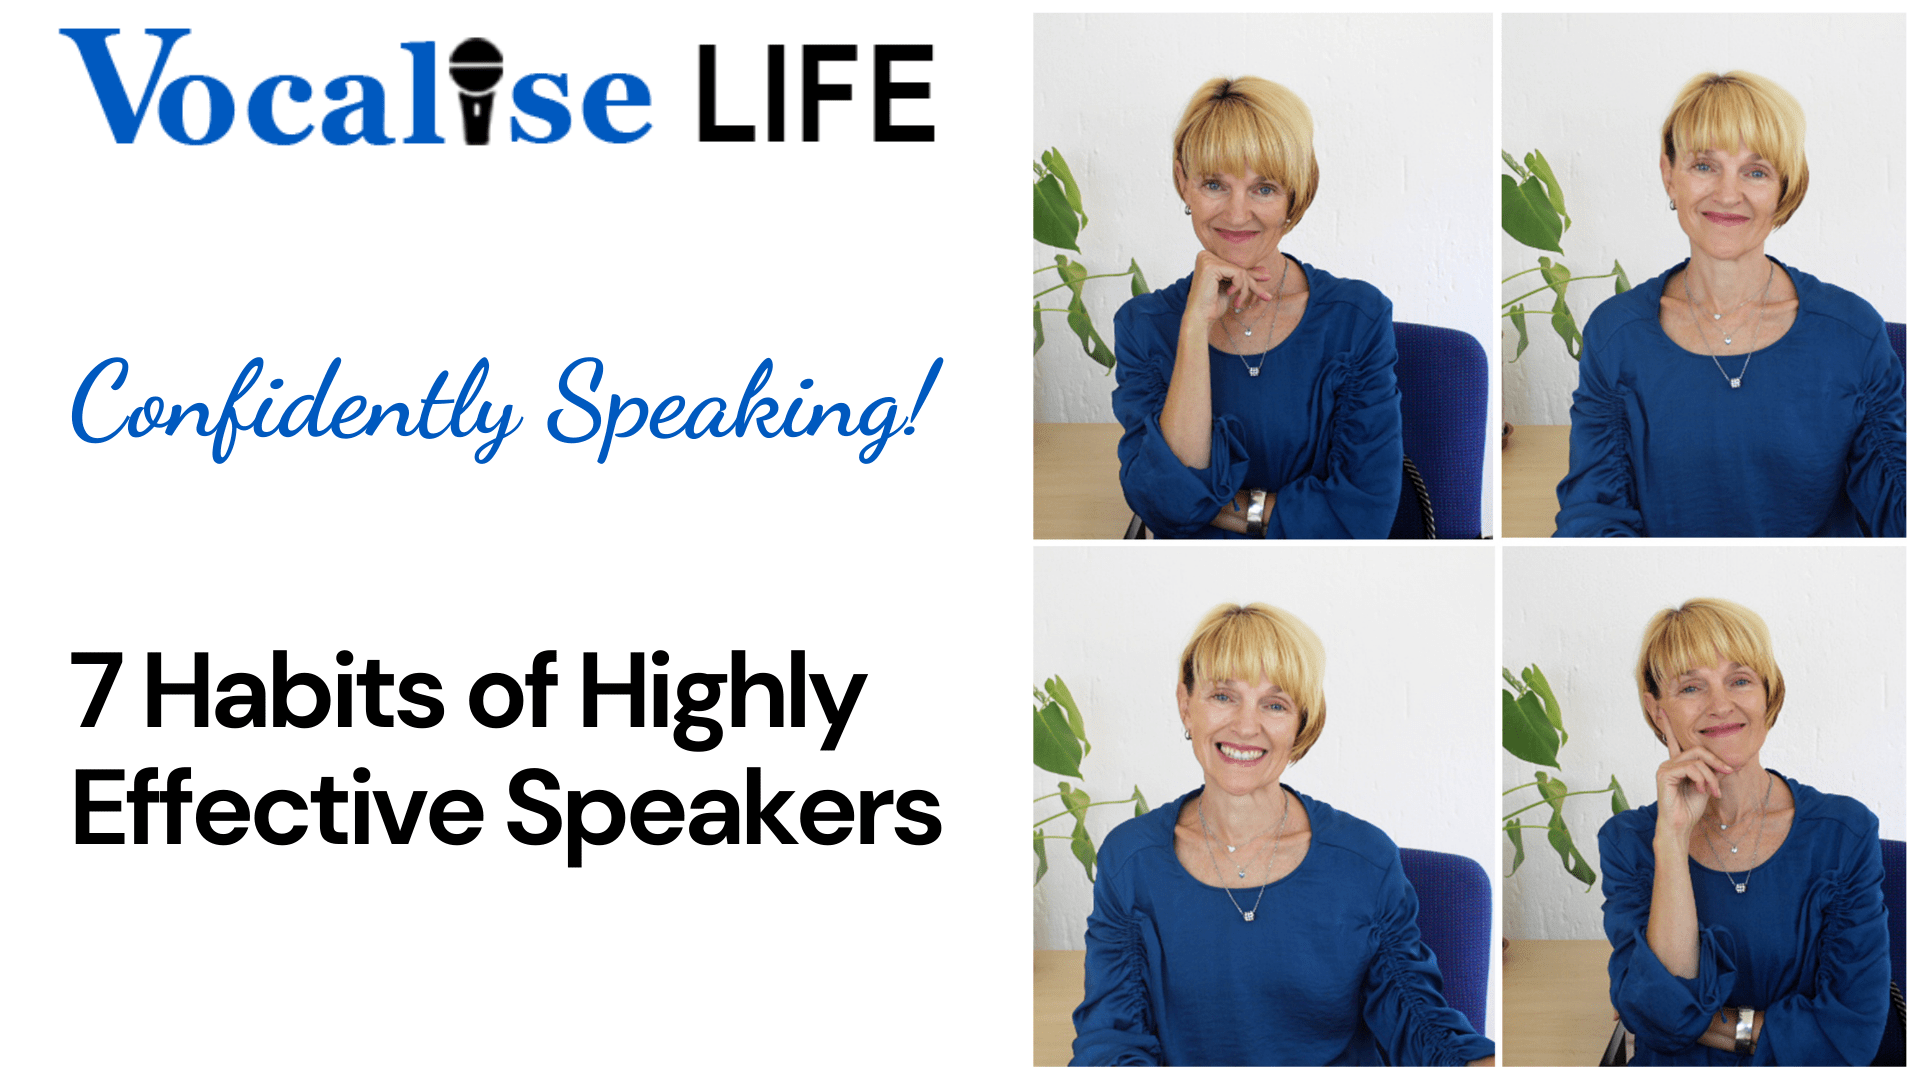 Confidently Speaking: 7 Habits of Highly Effective Speakers